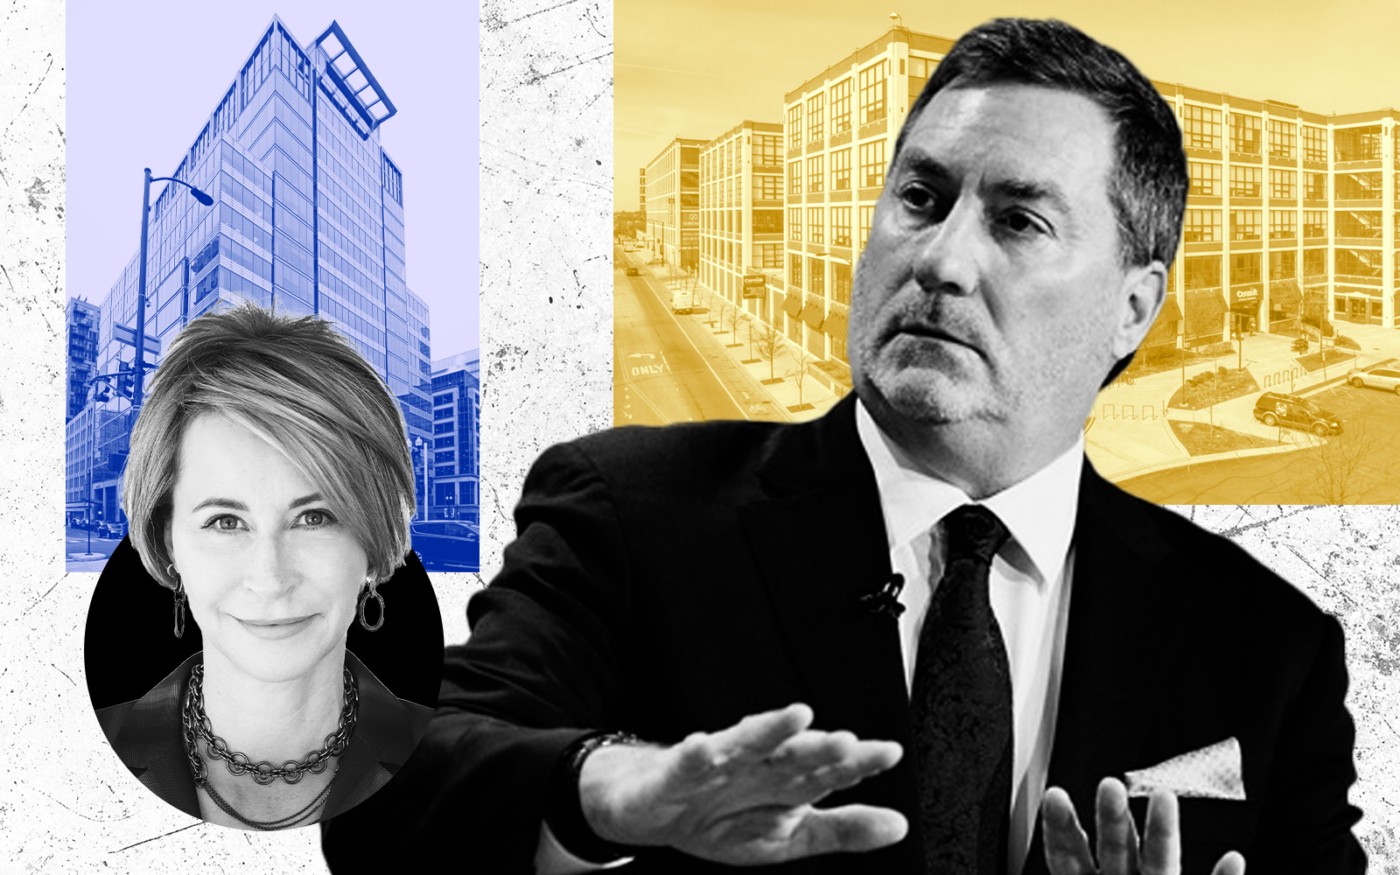 From left: Cushman & Wakefield CEO Michelle MacKay and Avison Young's Mark E. Rose with 550 West Jackson Boulevard and 4000 West Diversey (Avison Young, Cushman & Wakefield, Stone Real Estate, LoopNet)